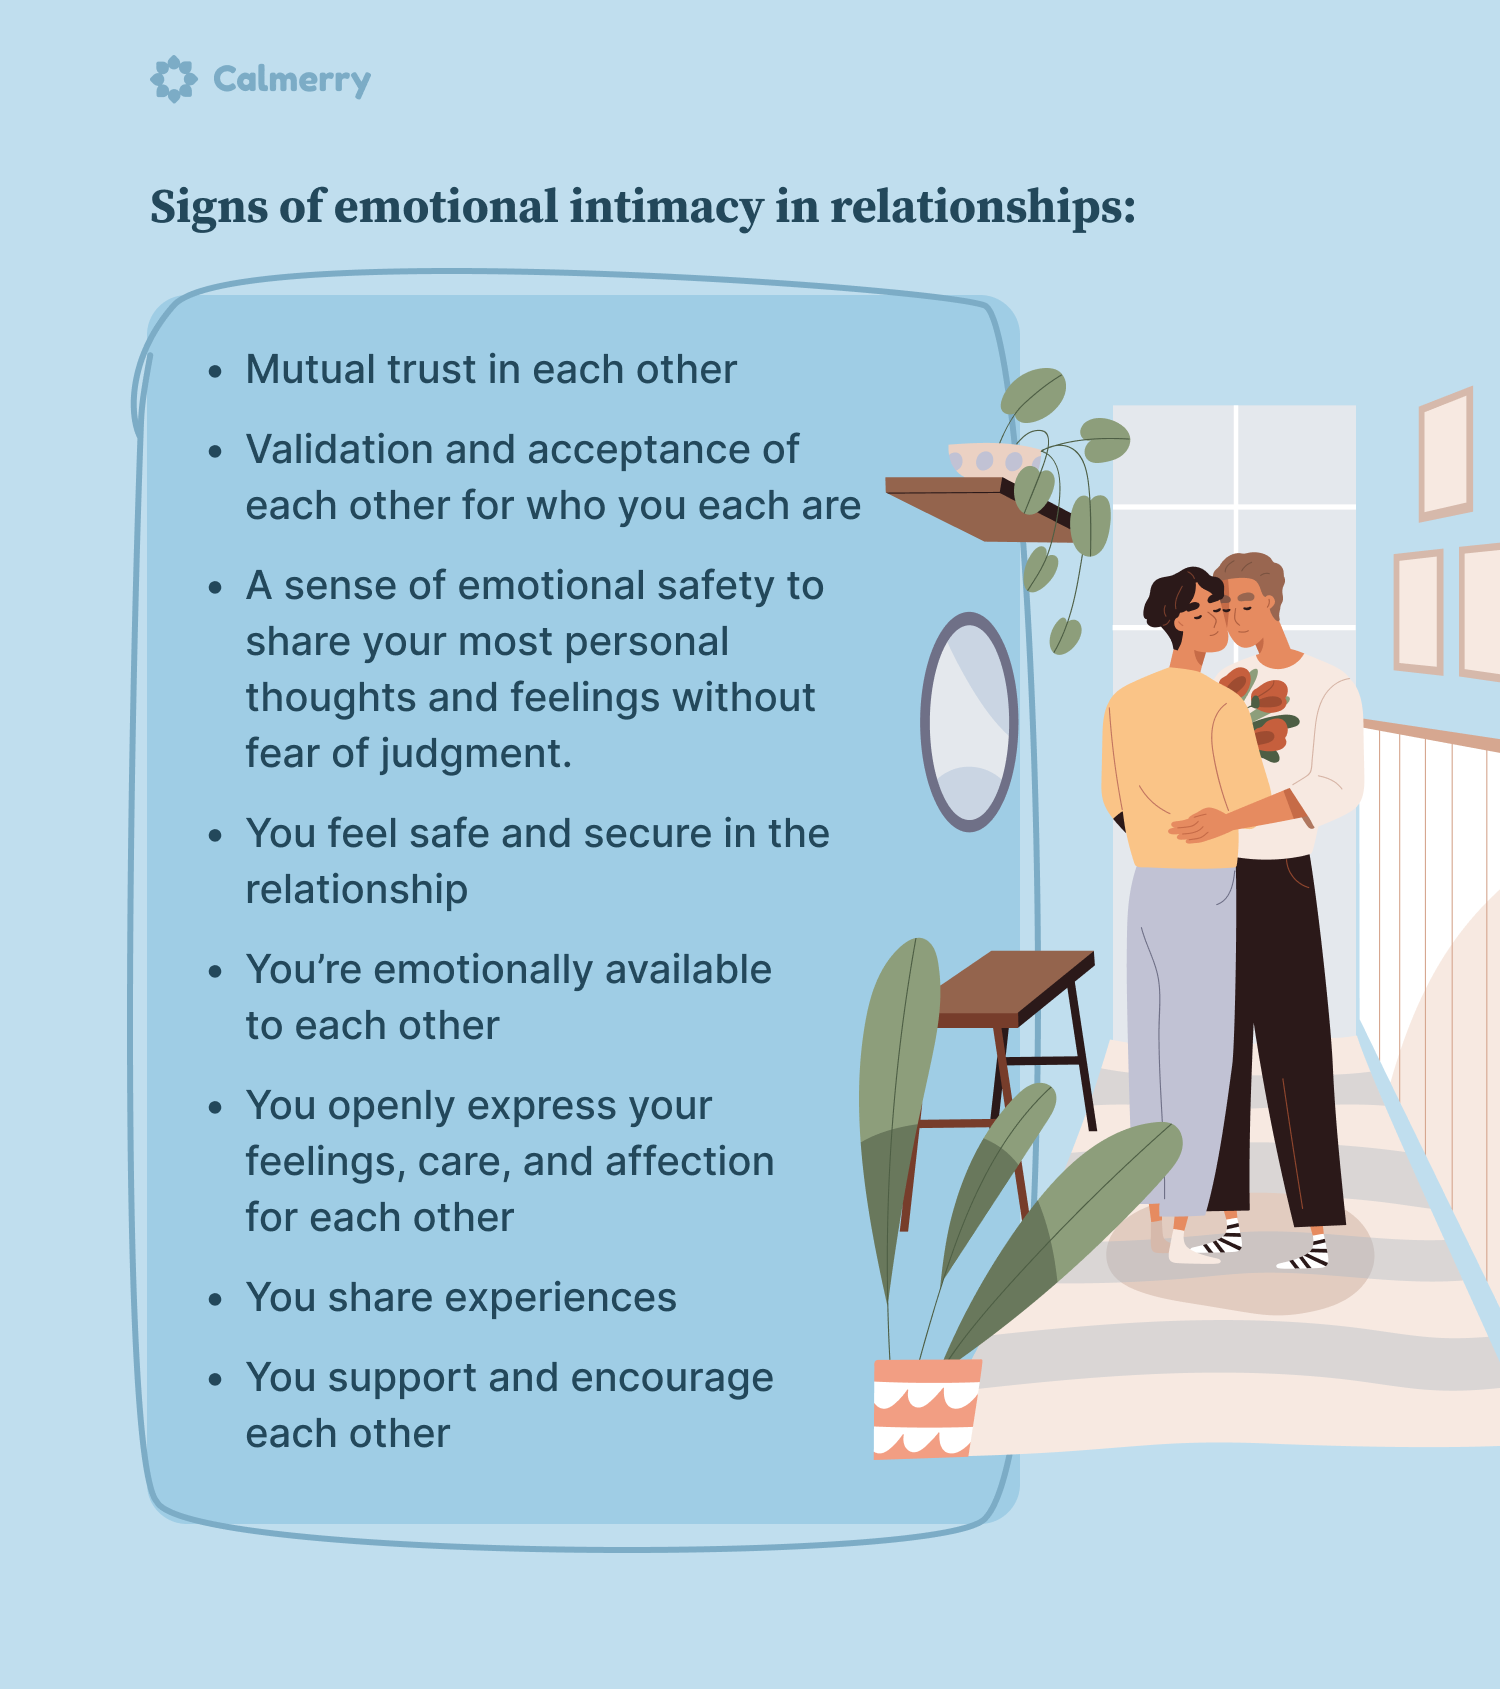 Signs of emotional intimacy in relationships list